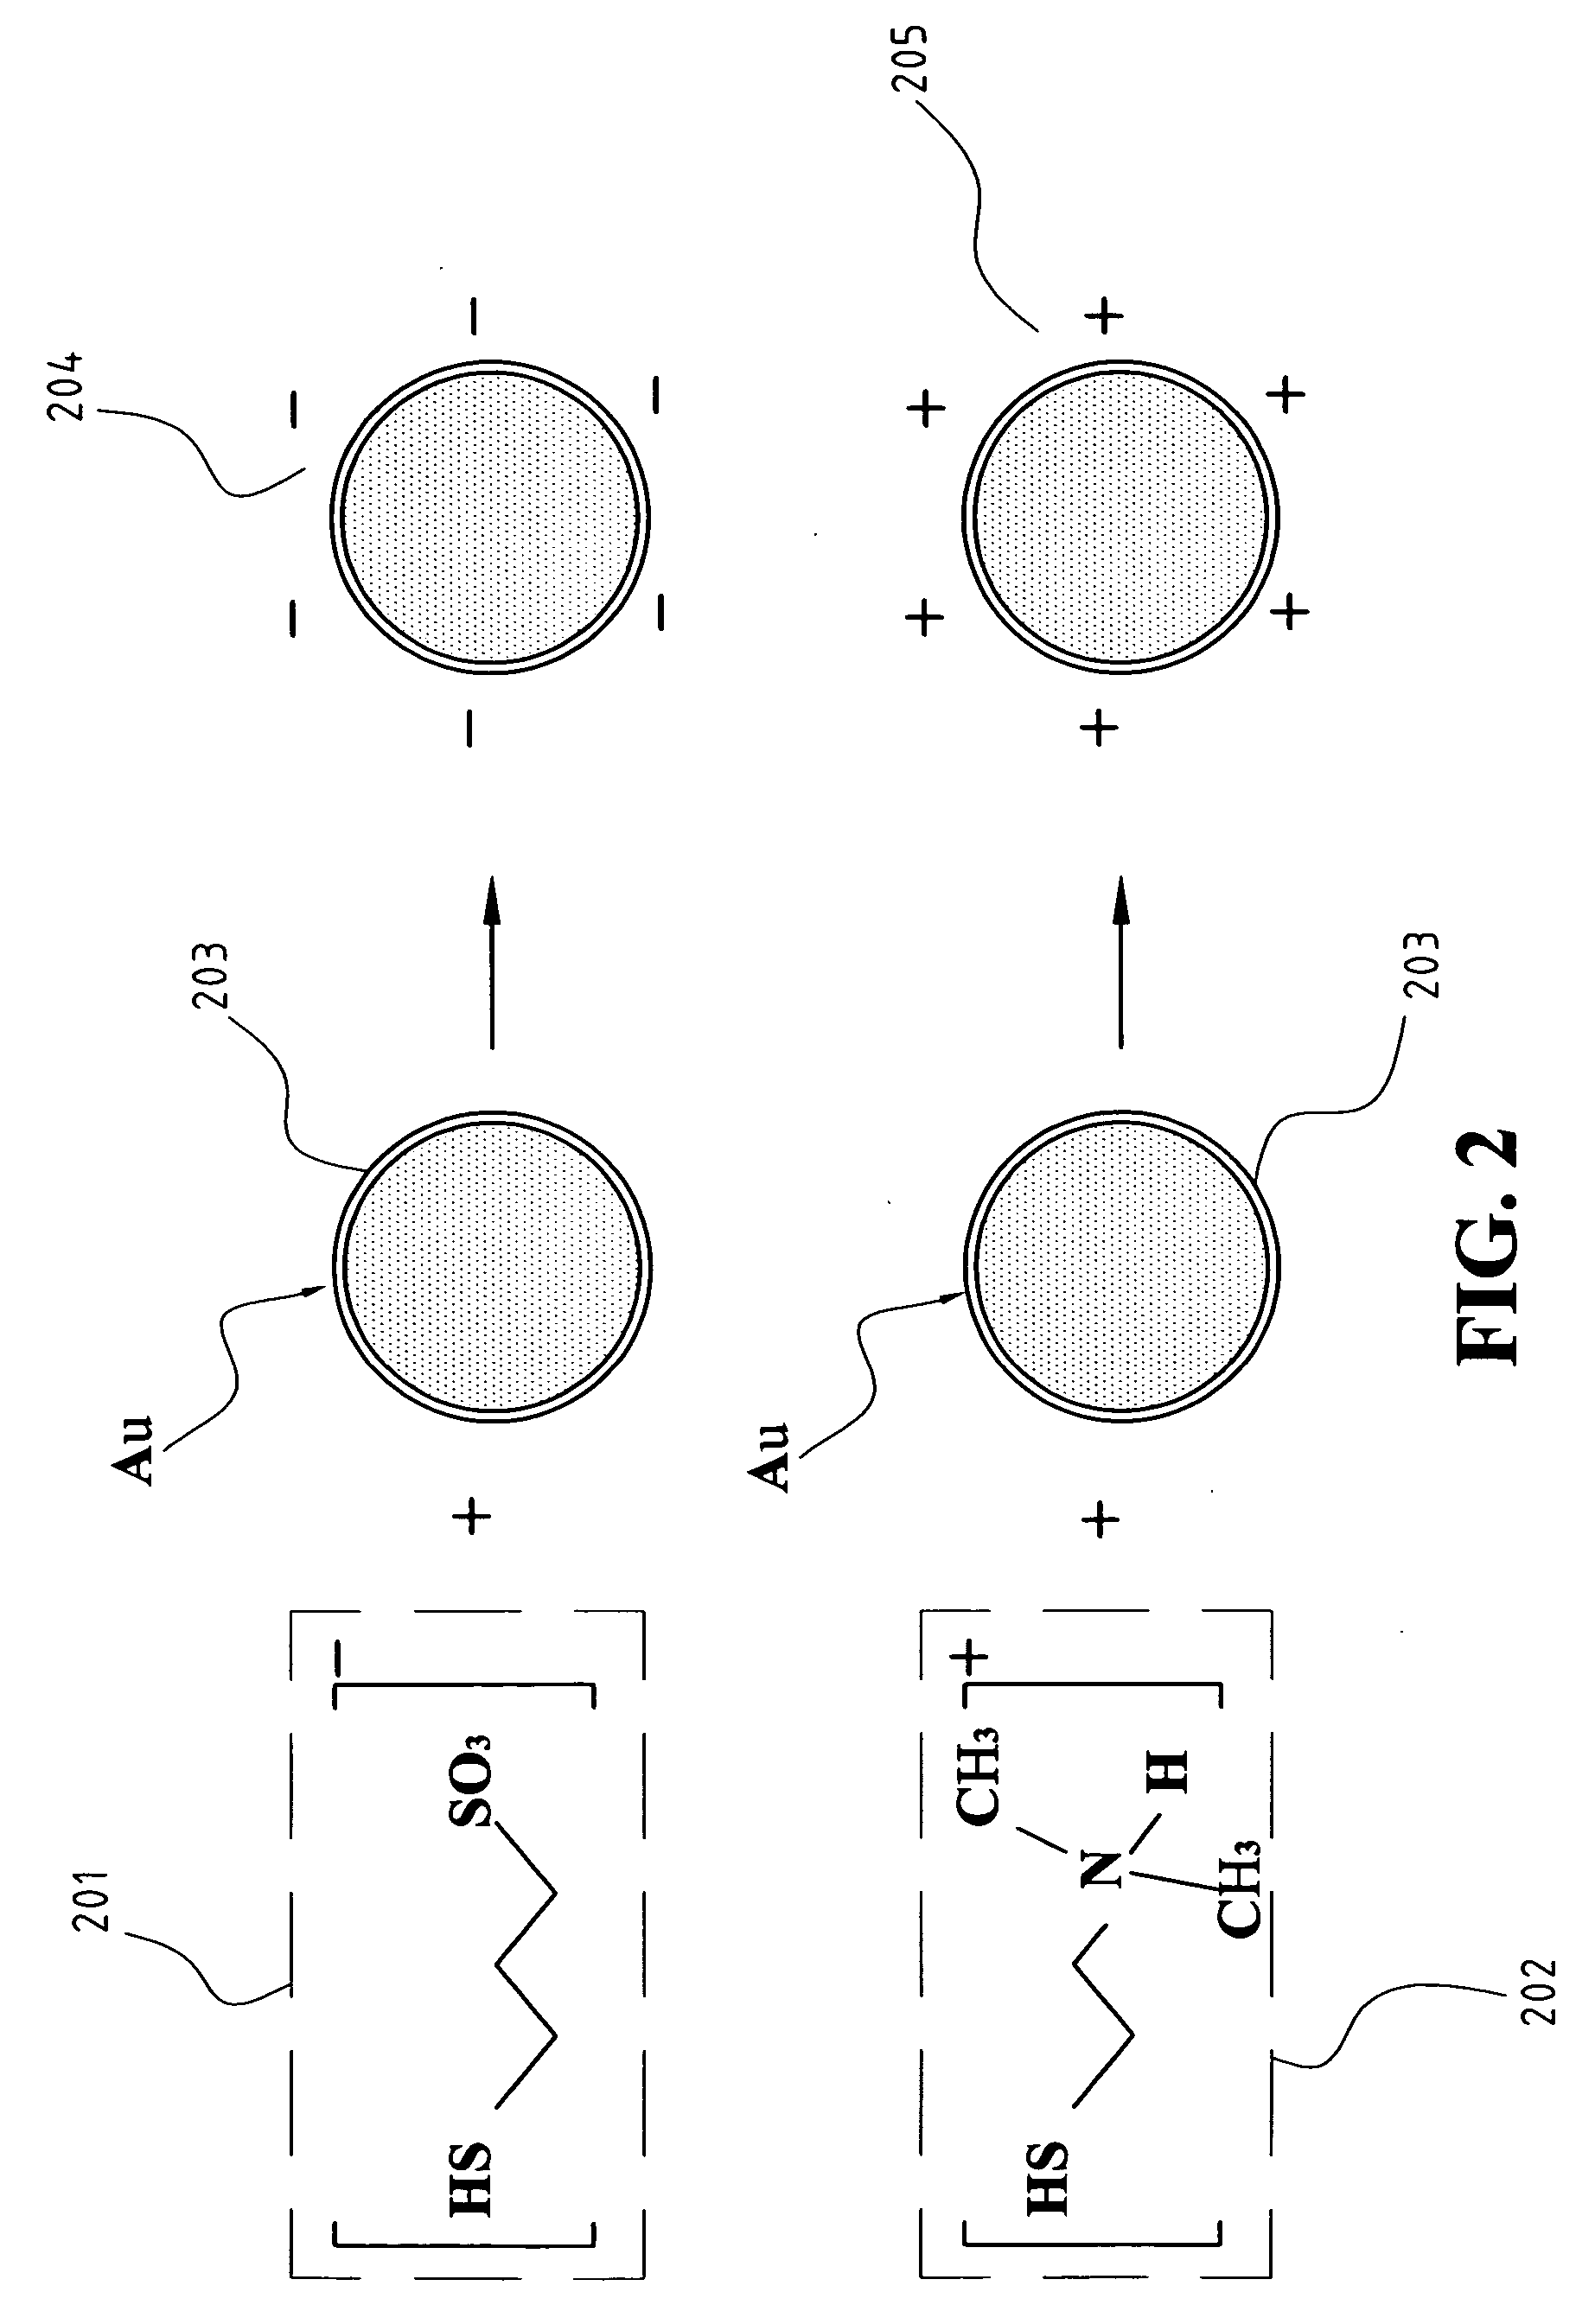 Method of conductive particles dispersing